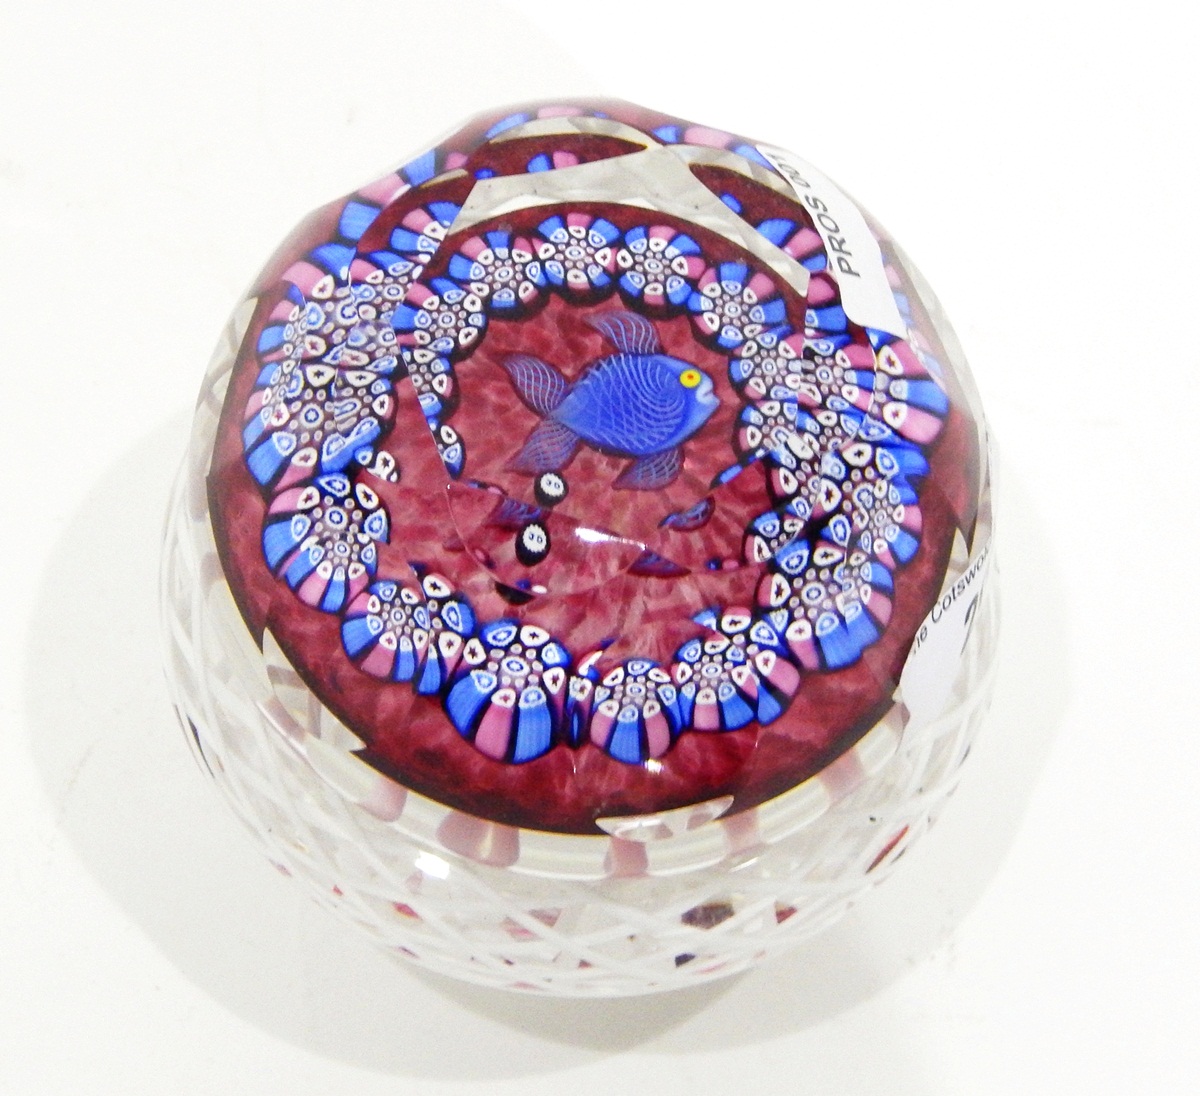 Glass paperweight by John Deacons of faceted circular form with central lampwork and latticino cane